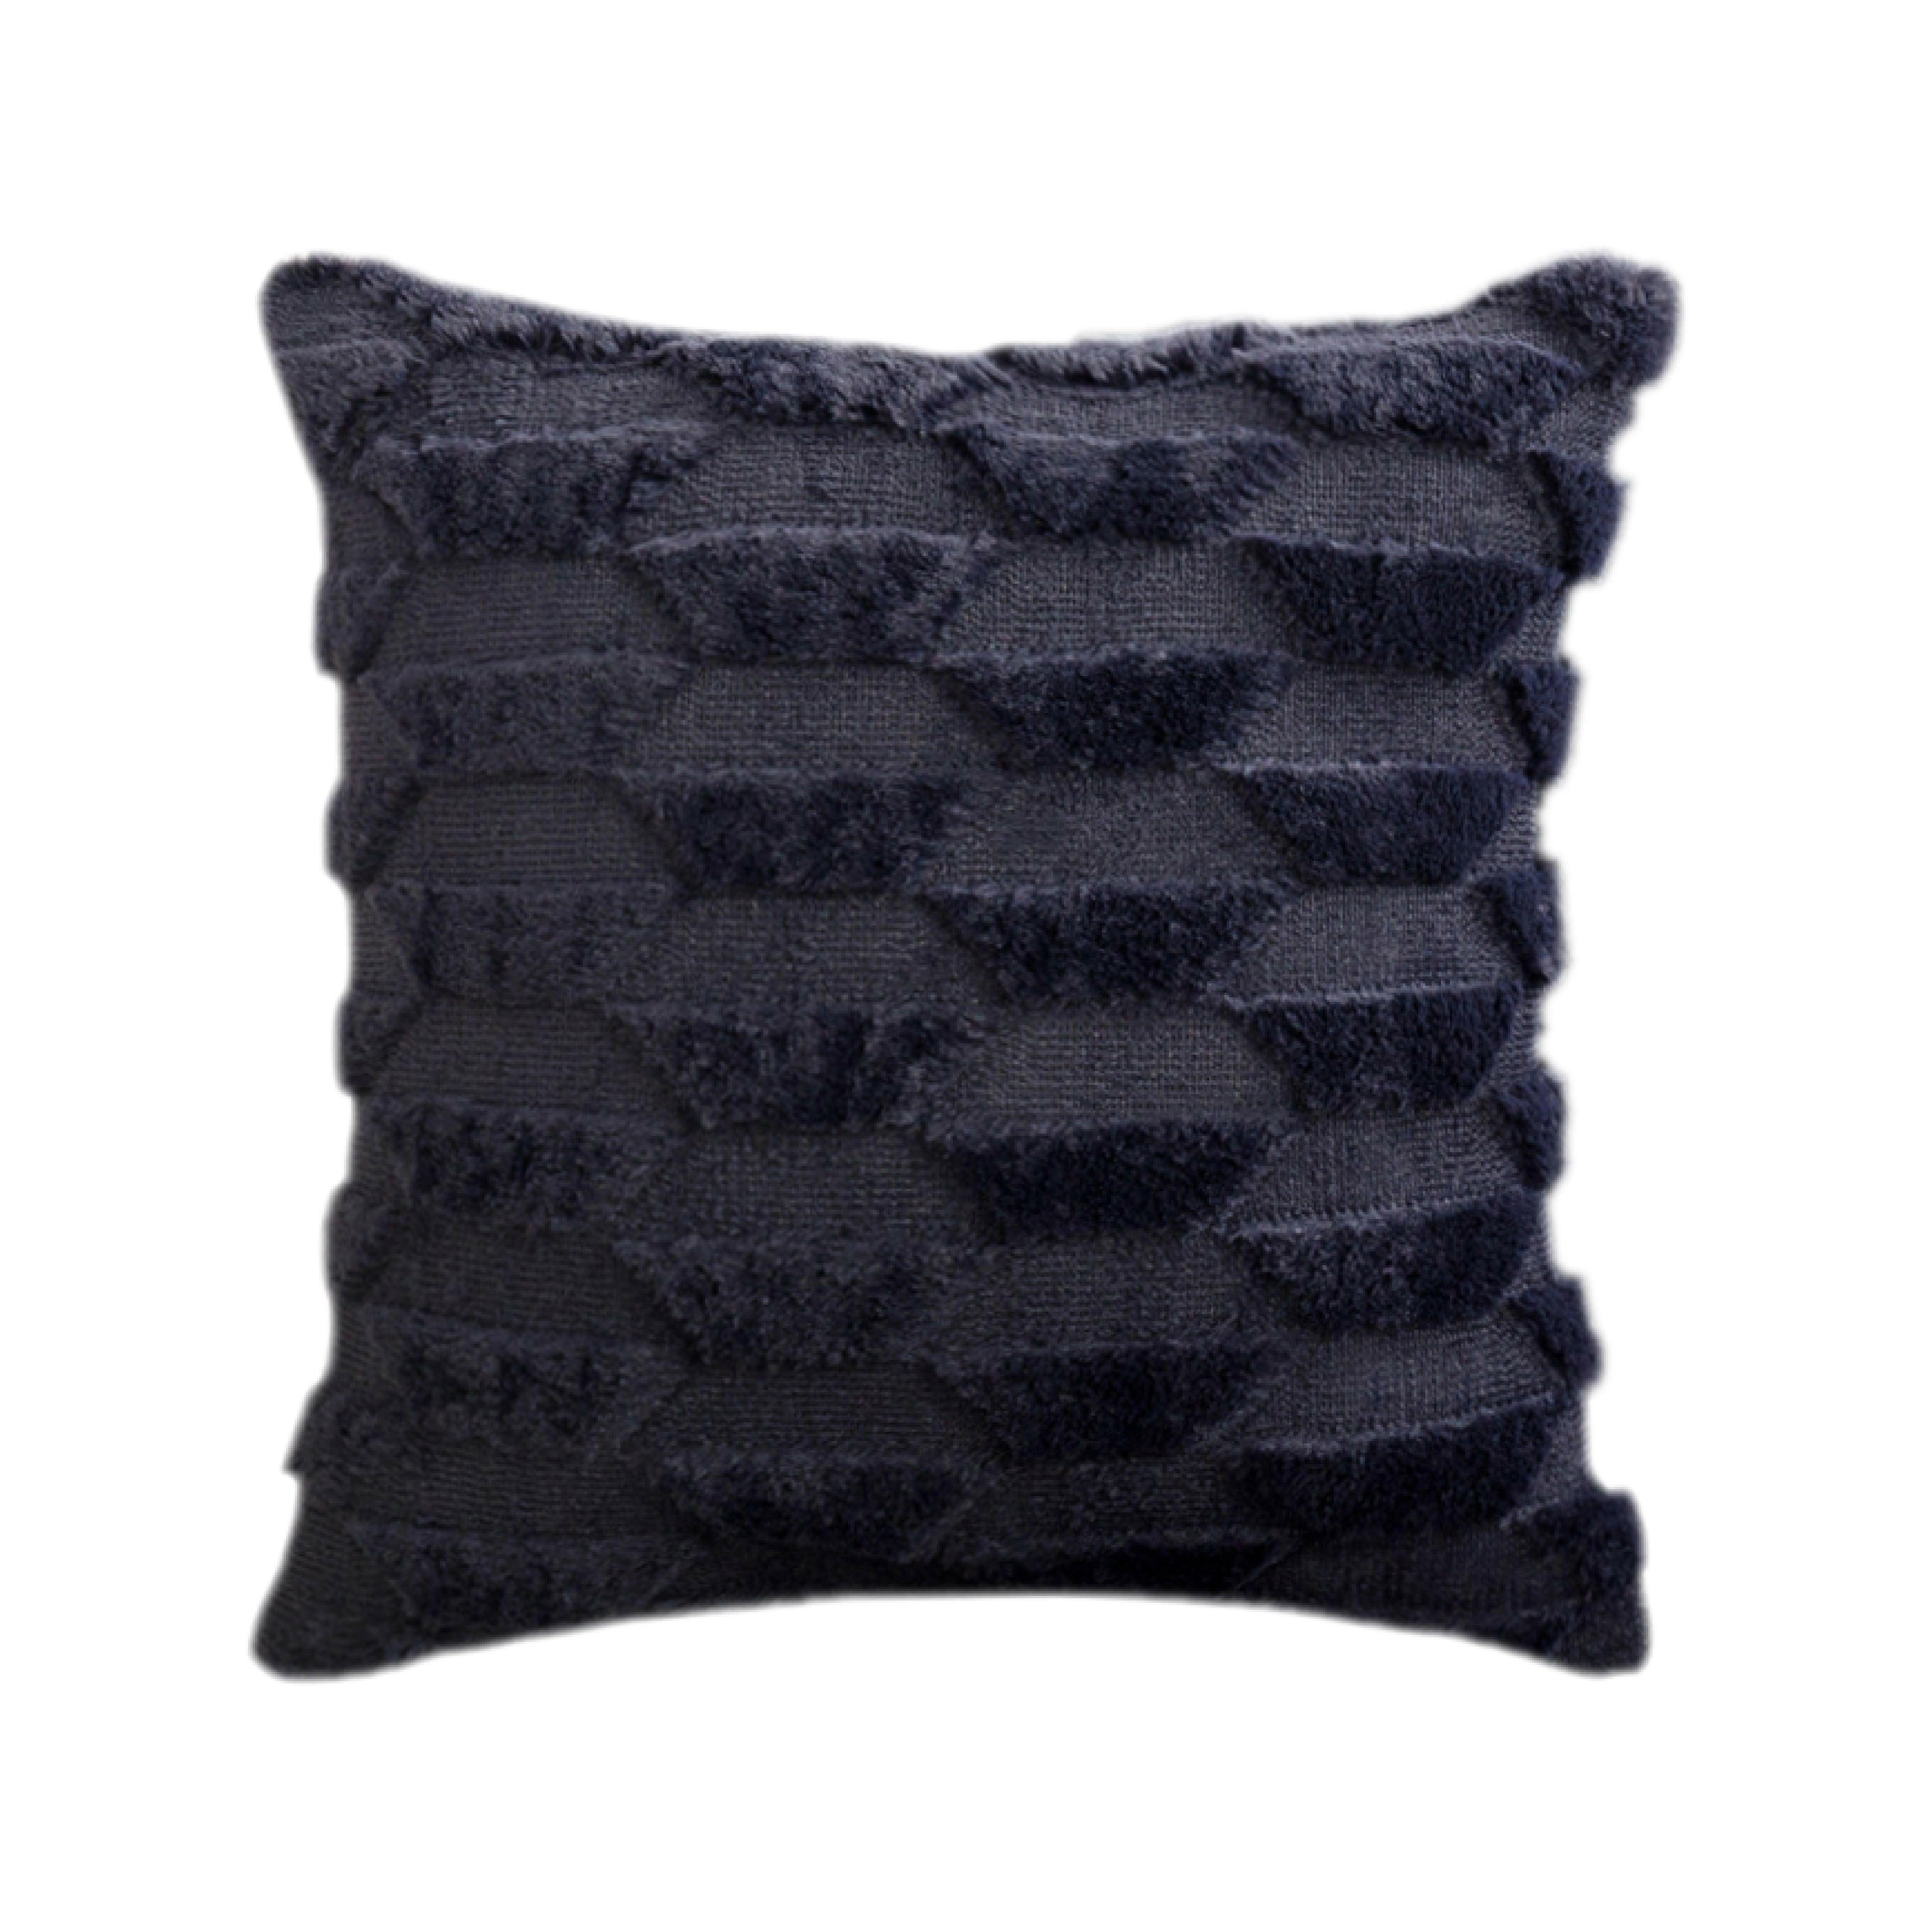 Hyper Cover Trapezoid Tufted Faux Fur Cushion Covers | Cushion Covers | Brilliant Home Living